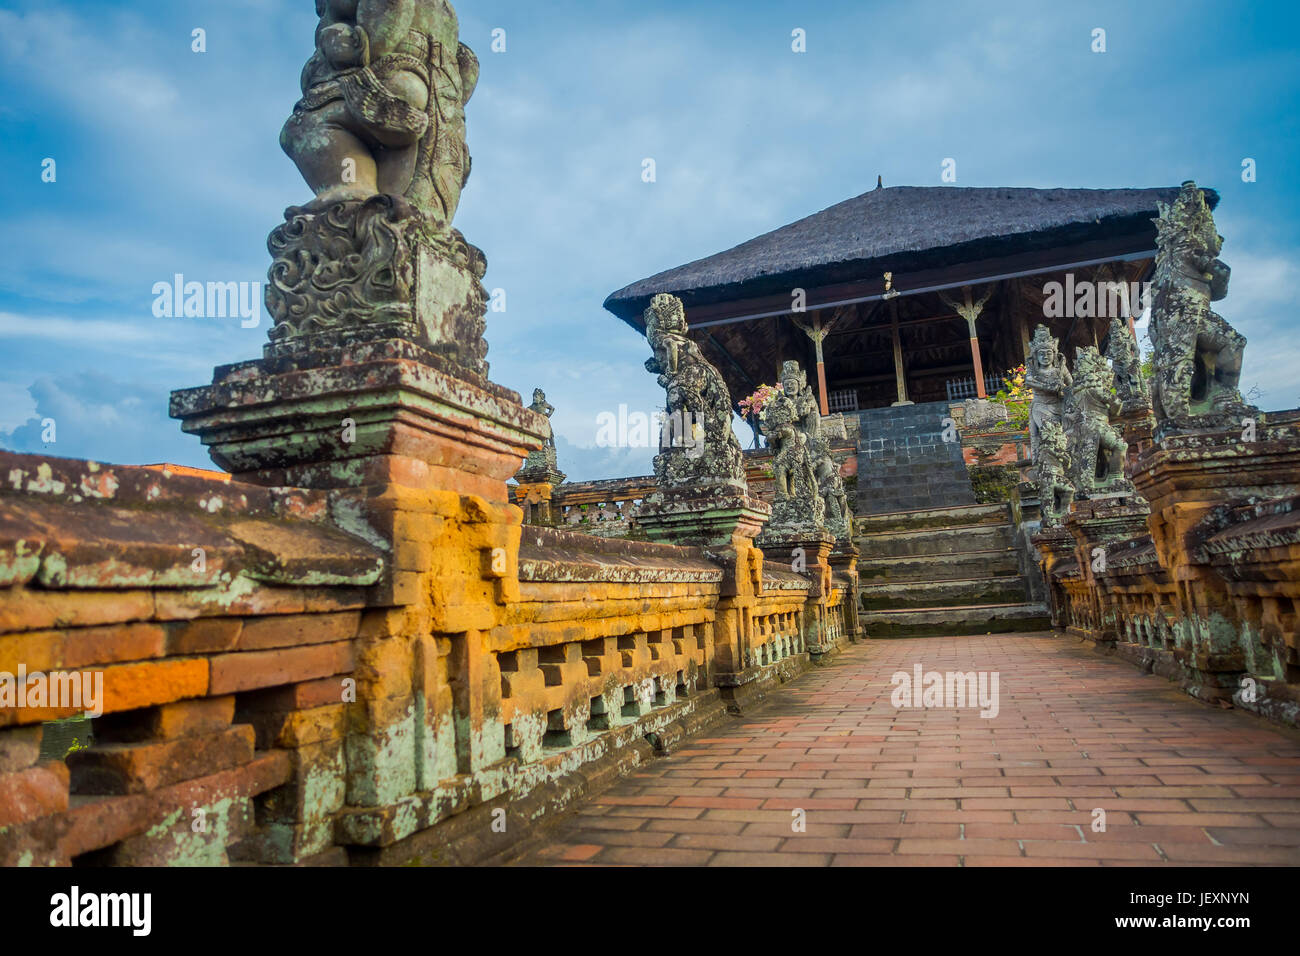 BALI, INDONESIA - MARCH 08, 2017: Semarapura, Kertha Gosa Pavilion in Klungkung Palace, in Denpasar city in Indonesia Stock Photo